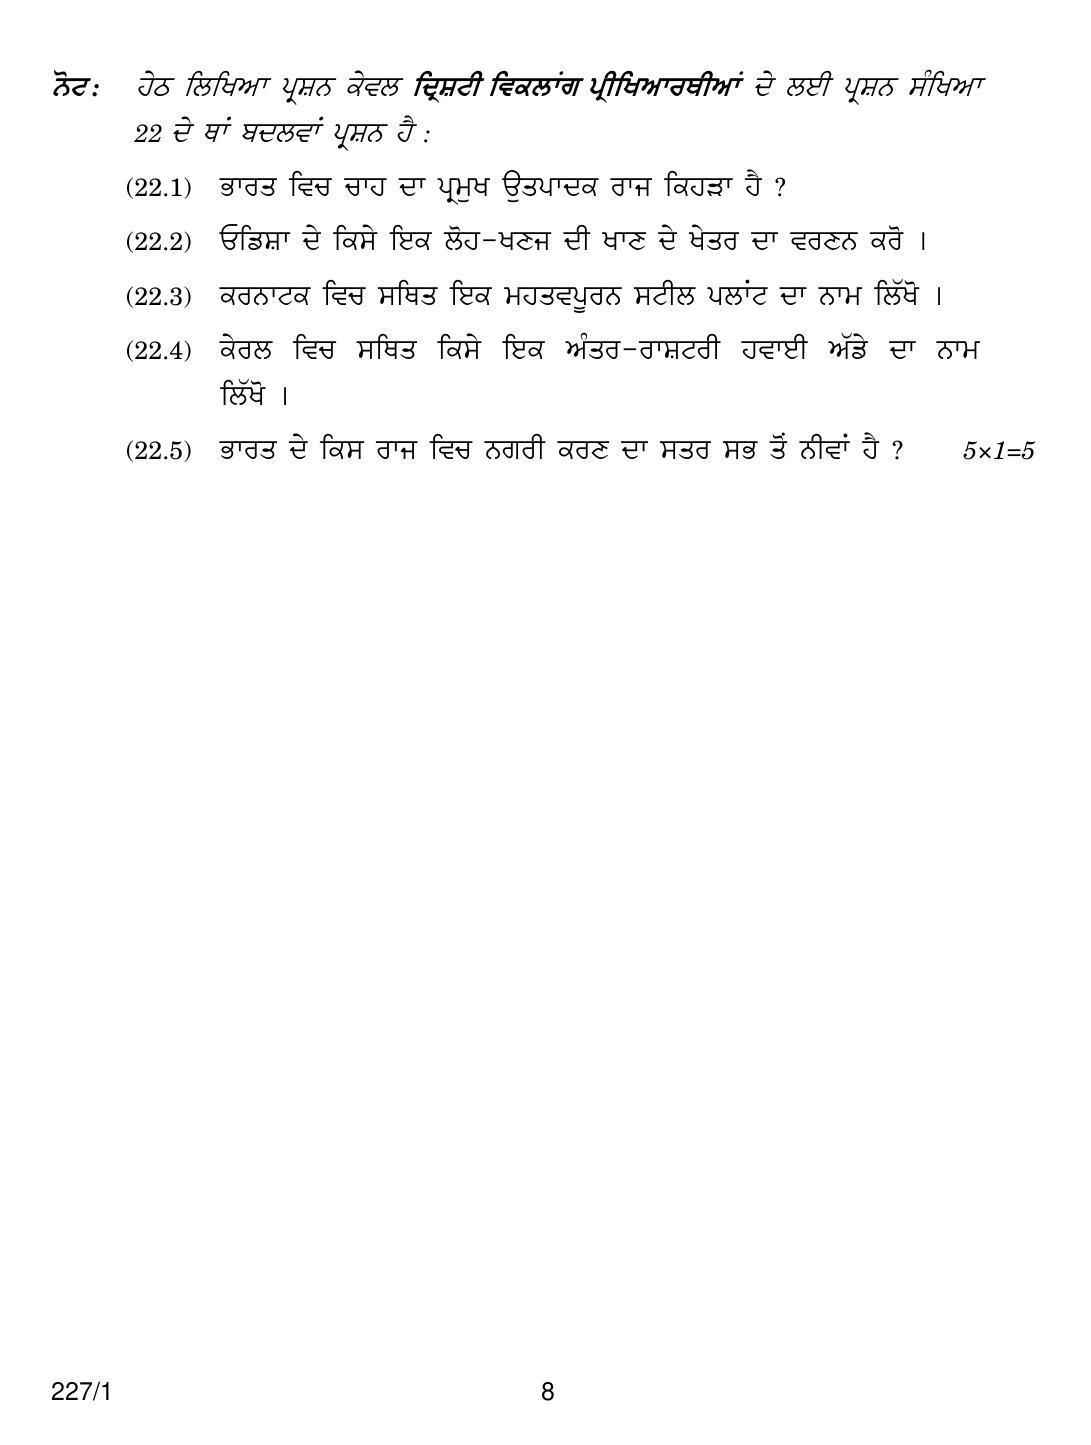 CBSE Class 12 227-1 GEOGRAPHY PUNJABI VERSION 2018 Question Paper - Page 8